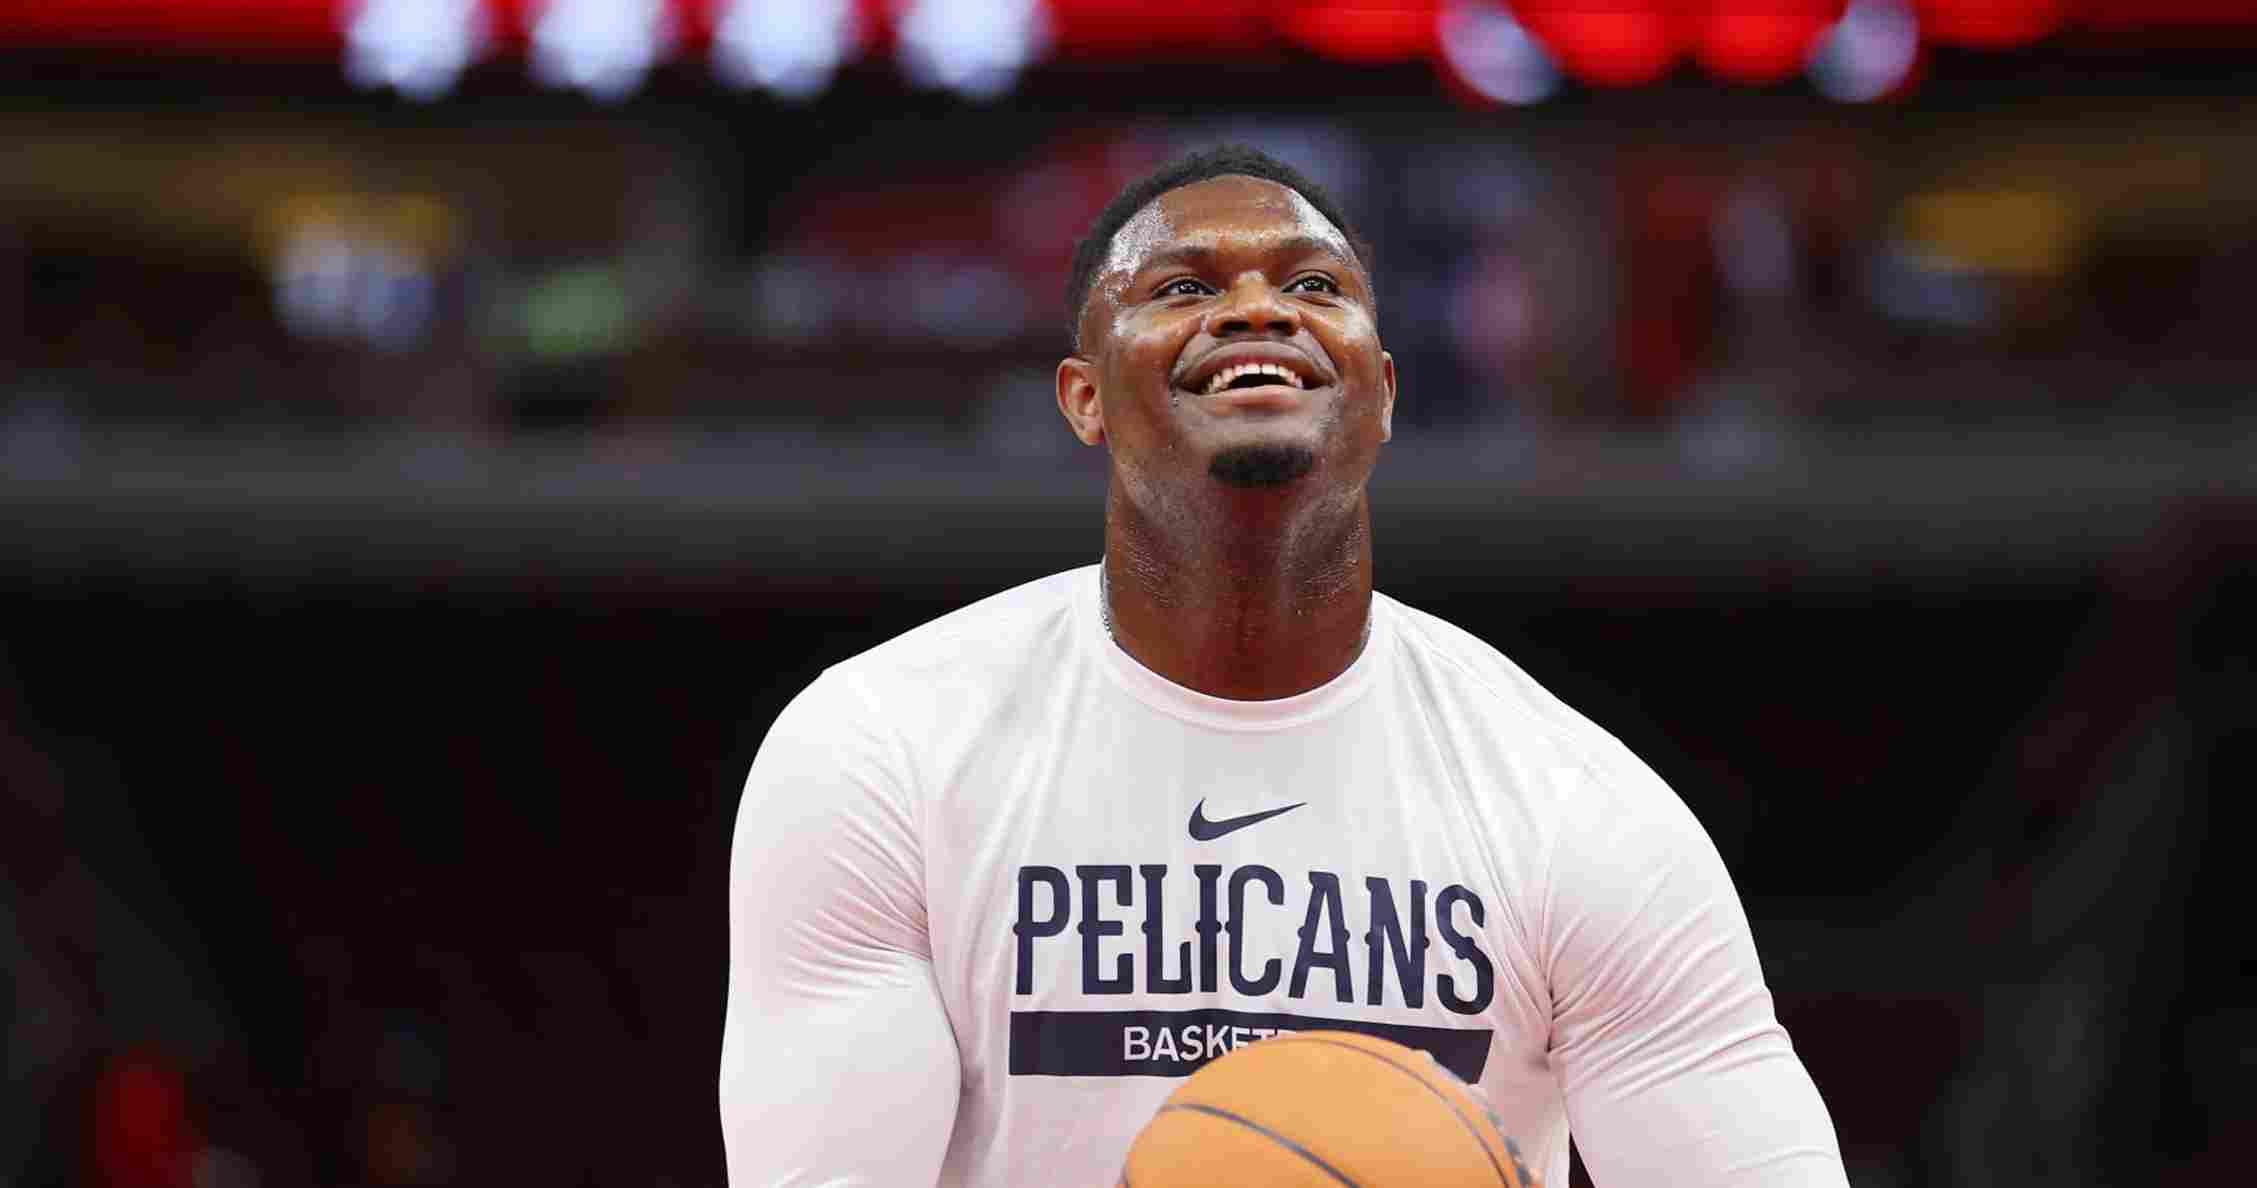 Pelicans News: After Coming Back From Injury, Zion Williamson’s Distinctive Force Is on Show, Helping the Pelicans Defeat the Clippers